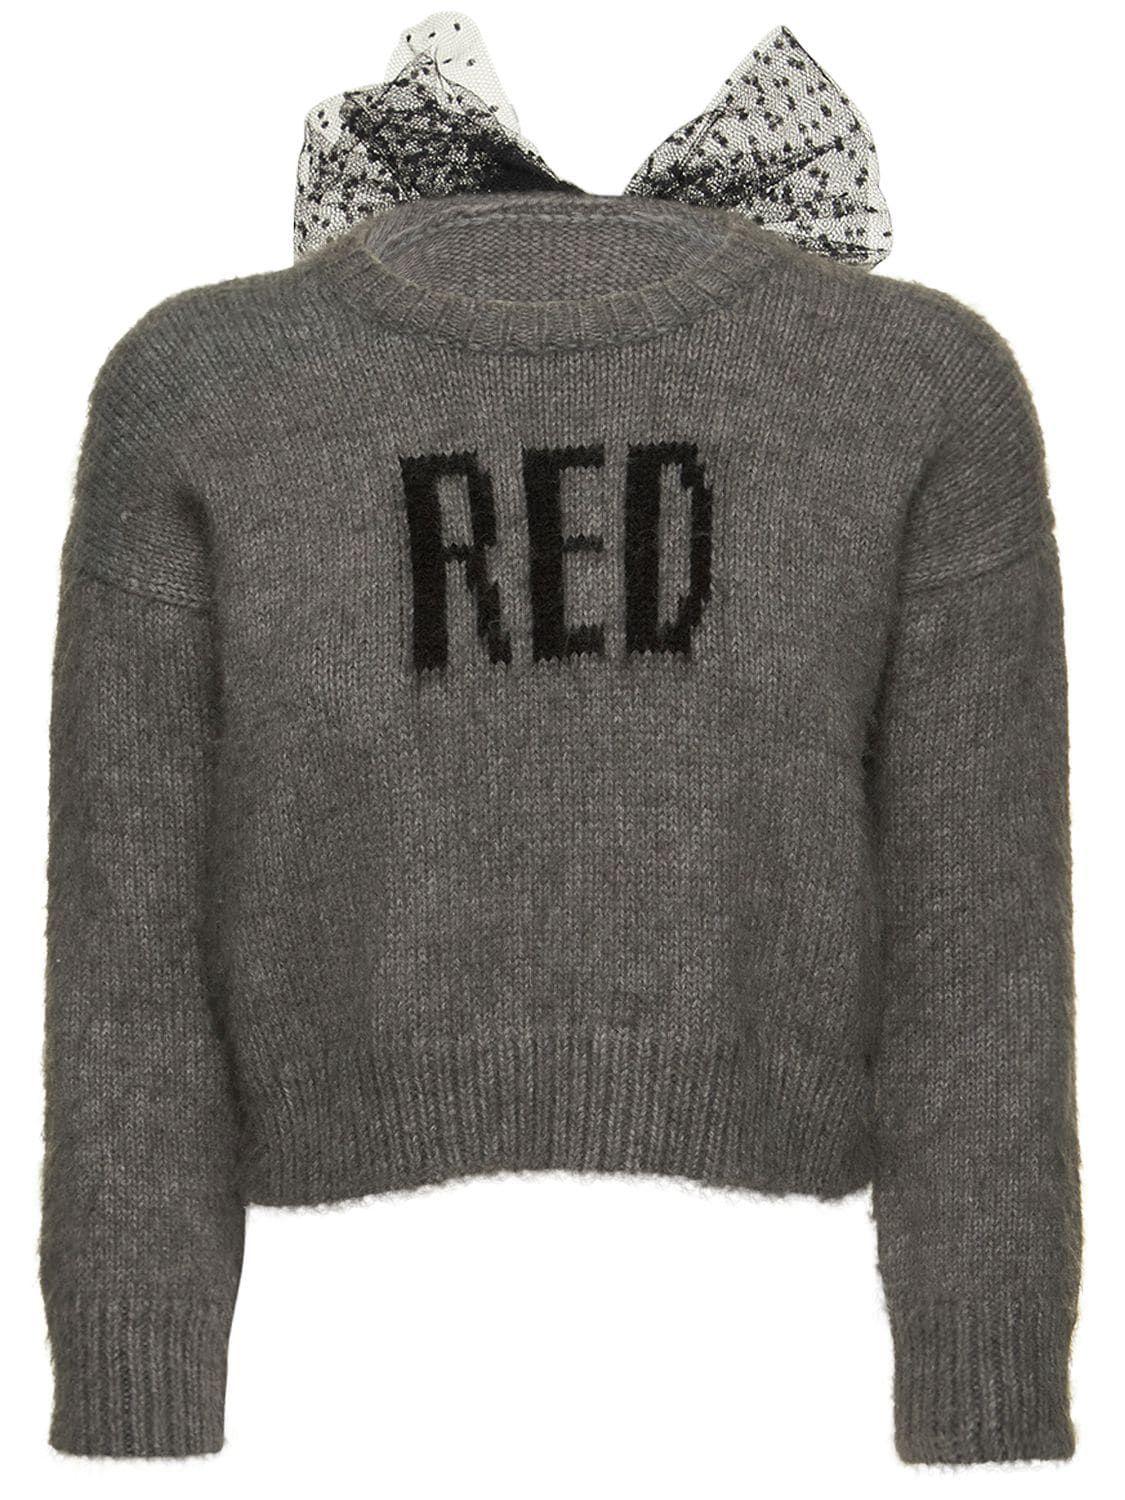 RED Valentino Mohair Blend Knit Sweater Bow Gray Lyst